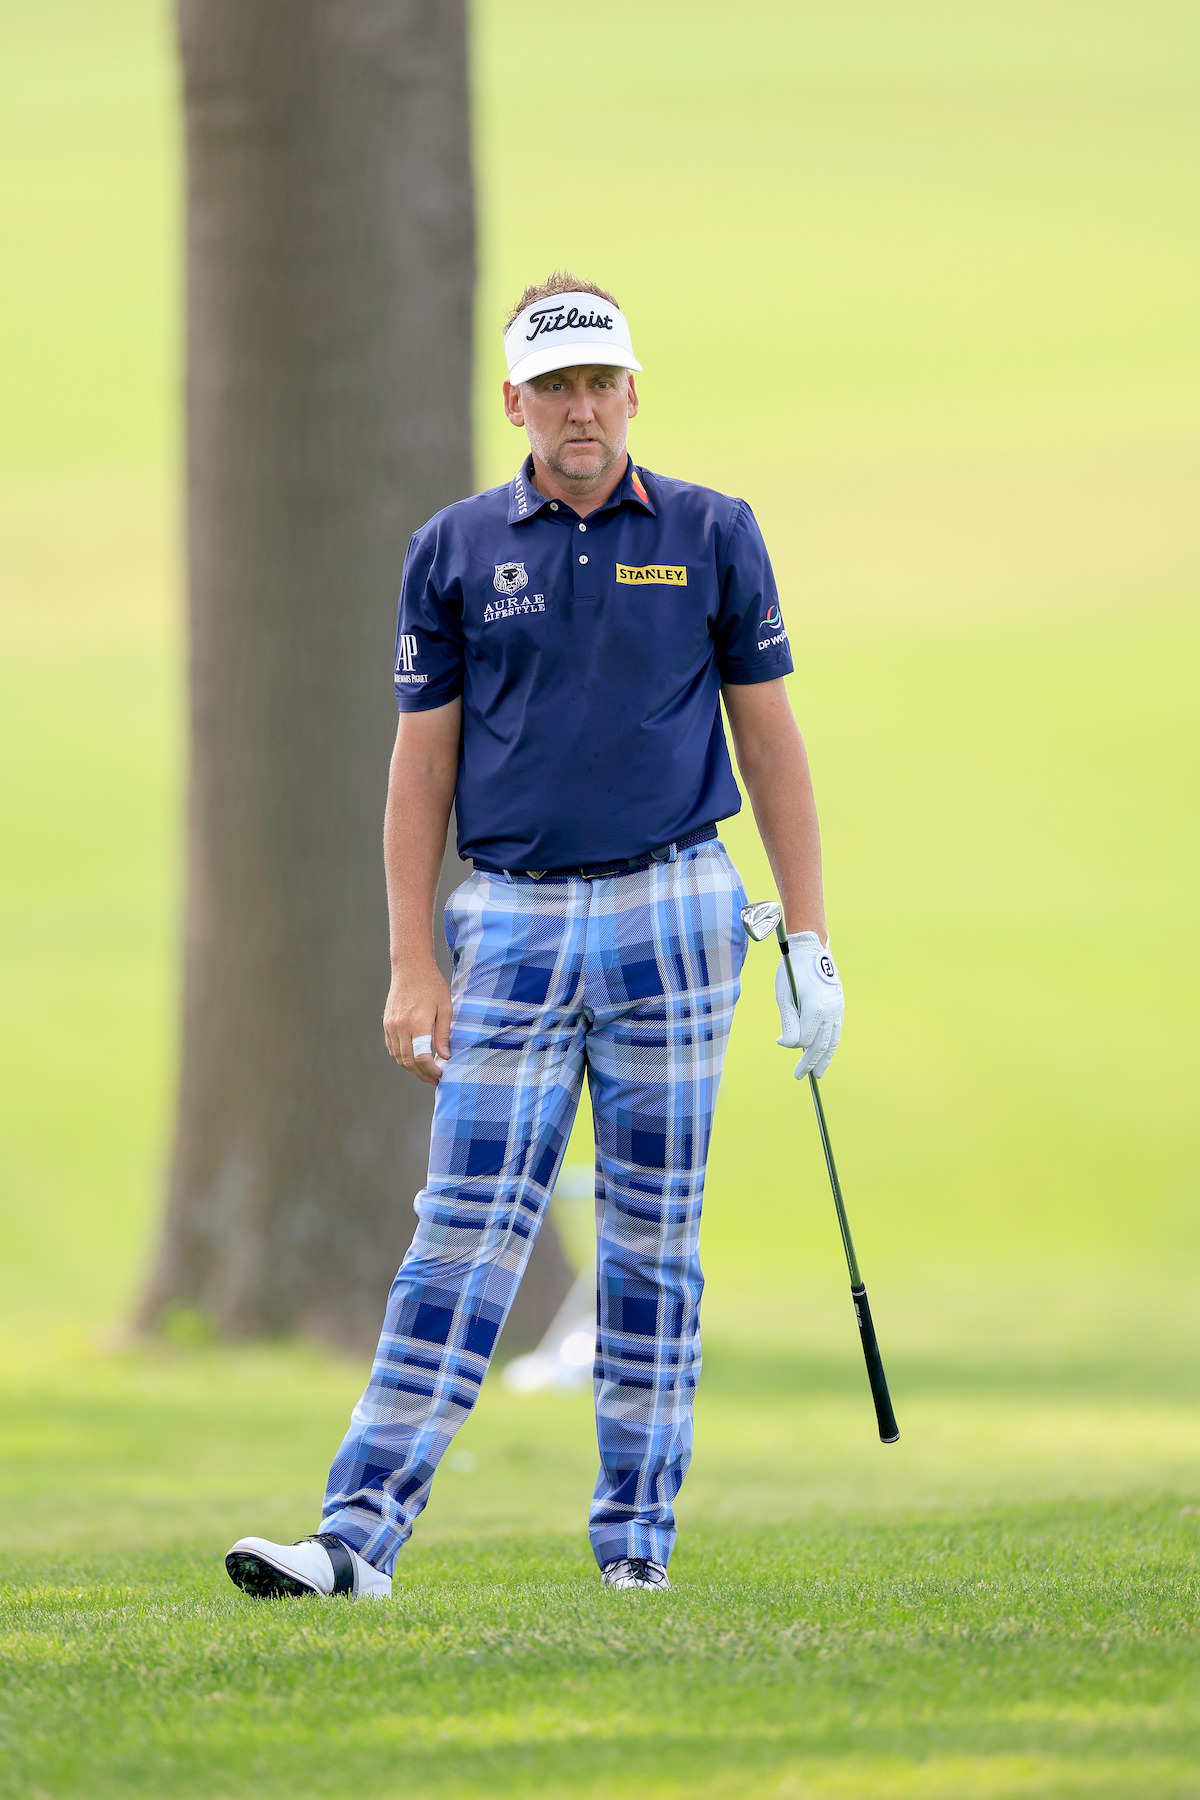 How Golf Wear Became a Fashion Statement for a New Breed of Golfer